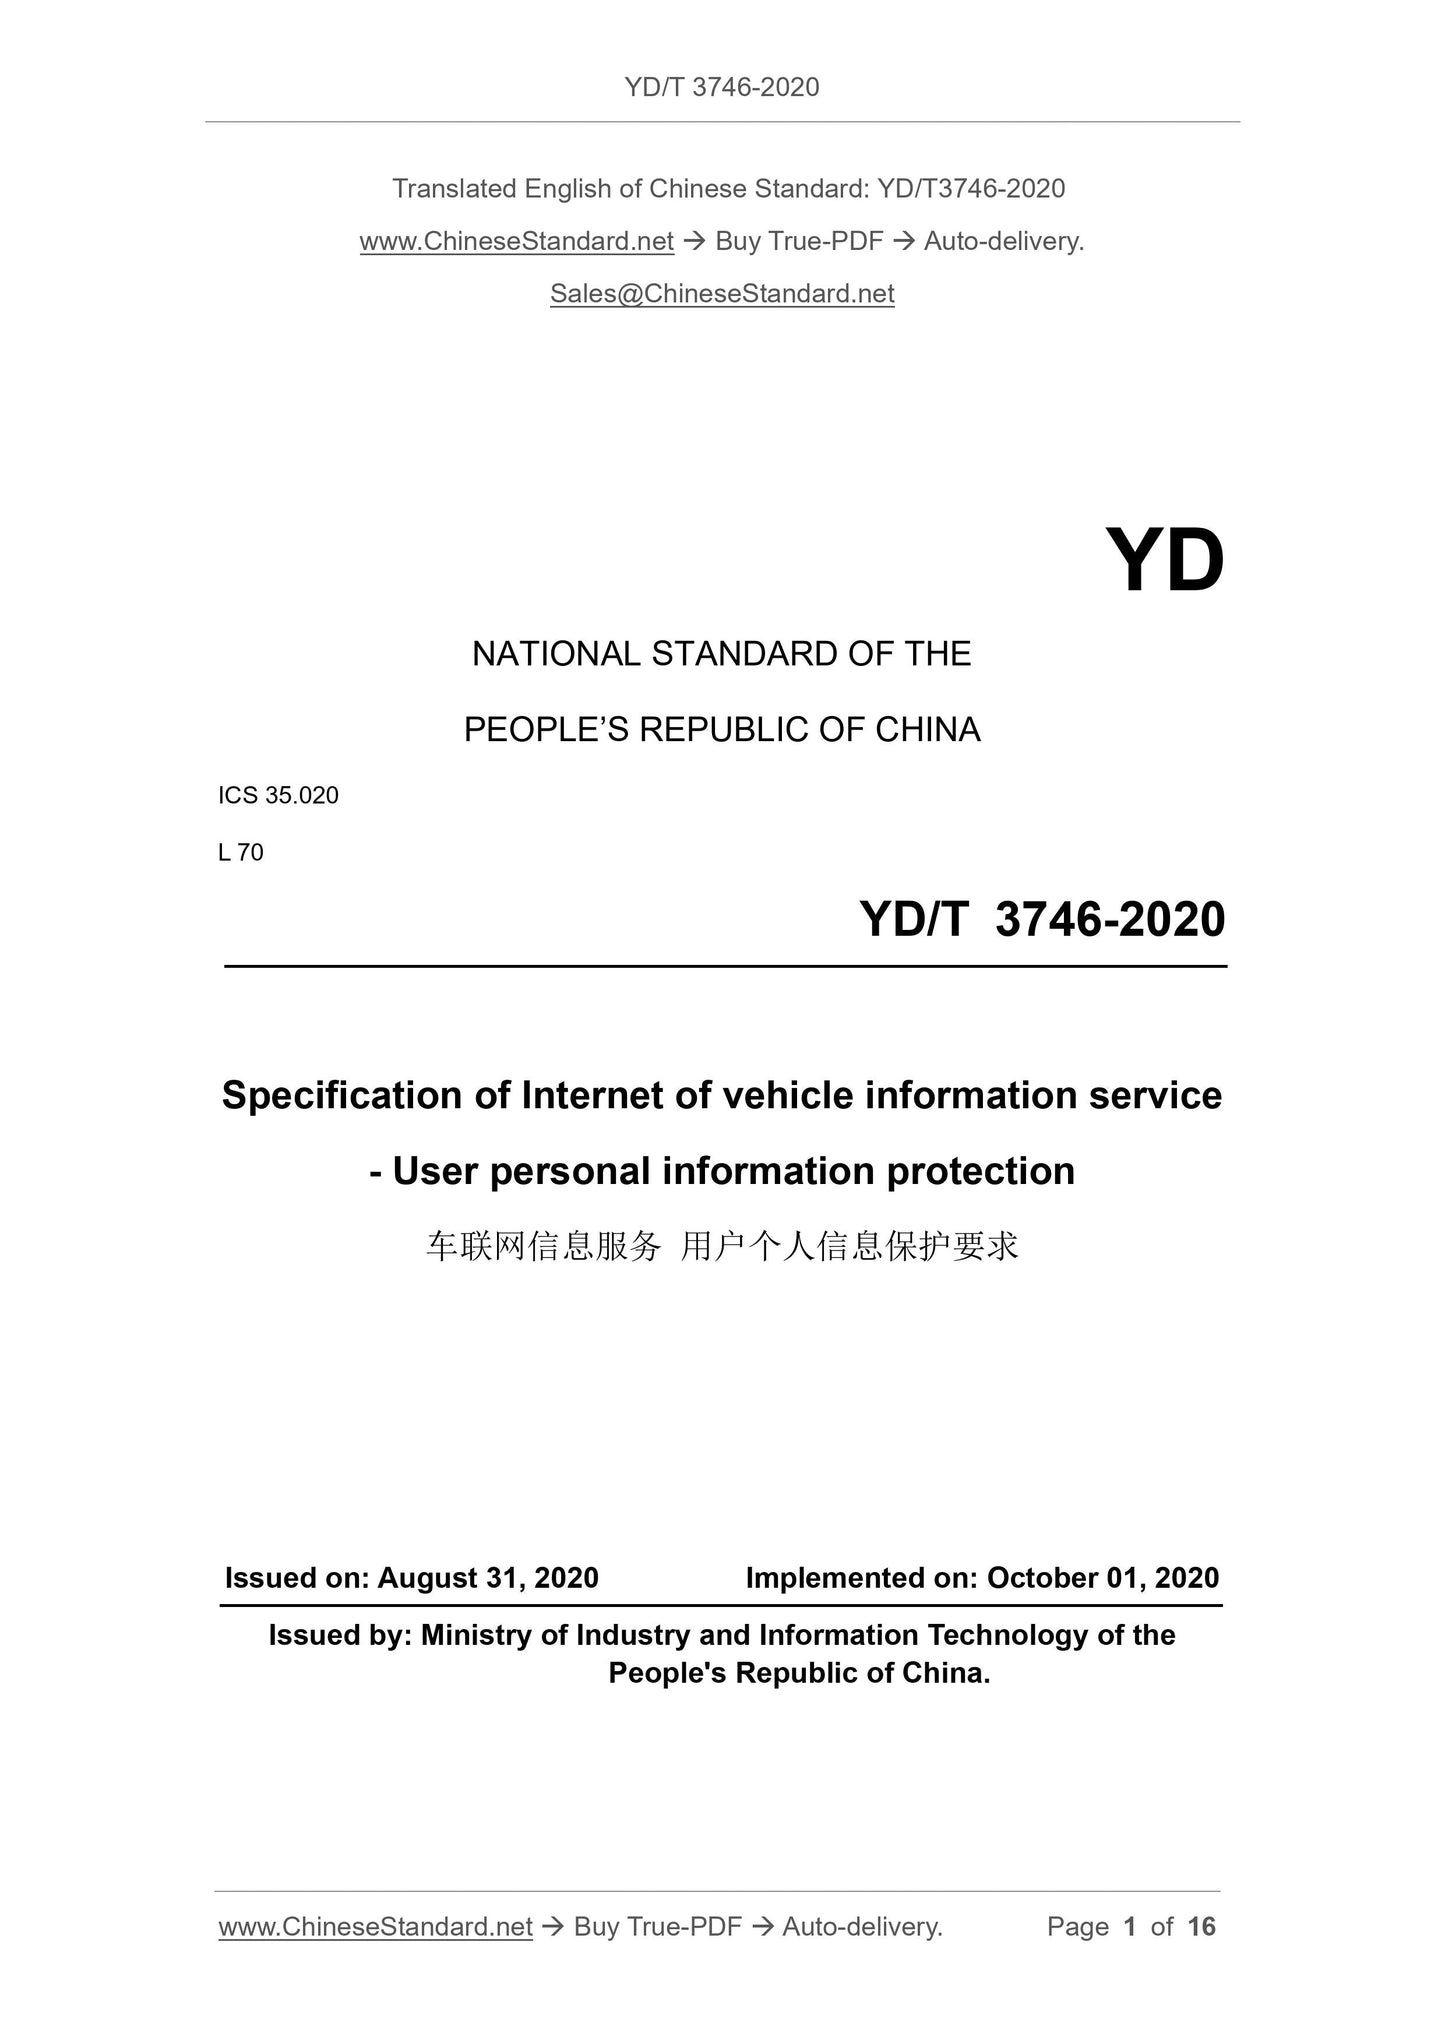 YD/T 3746-2020 Page 1